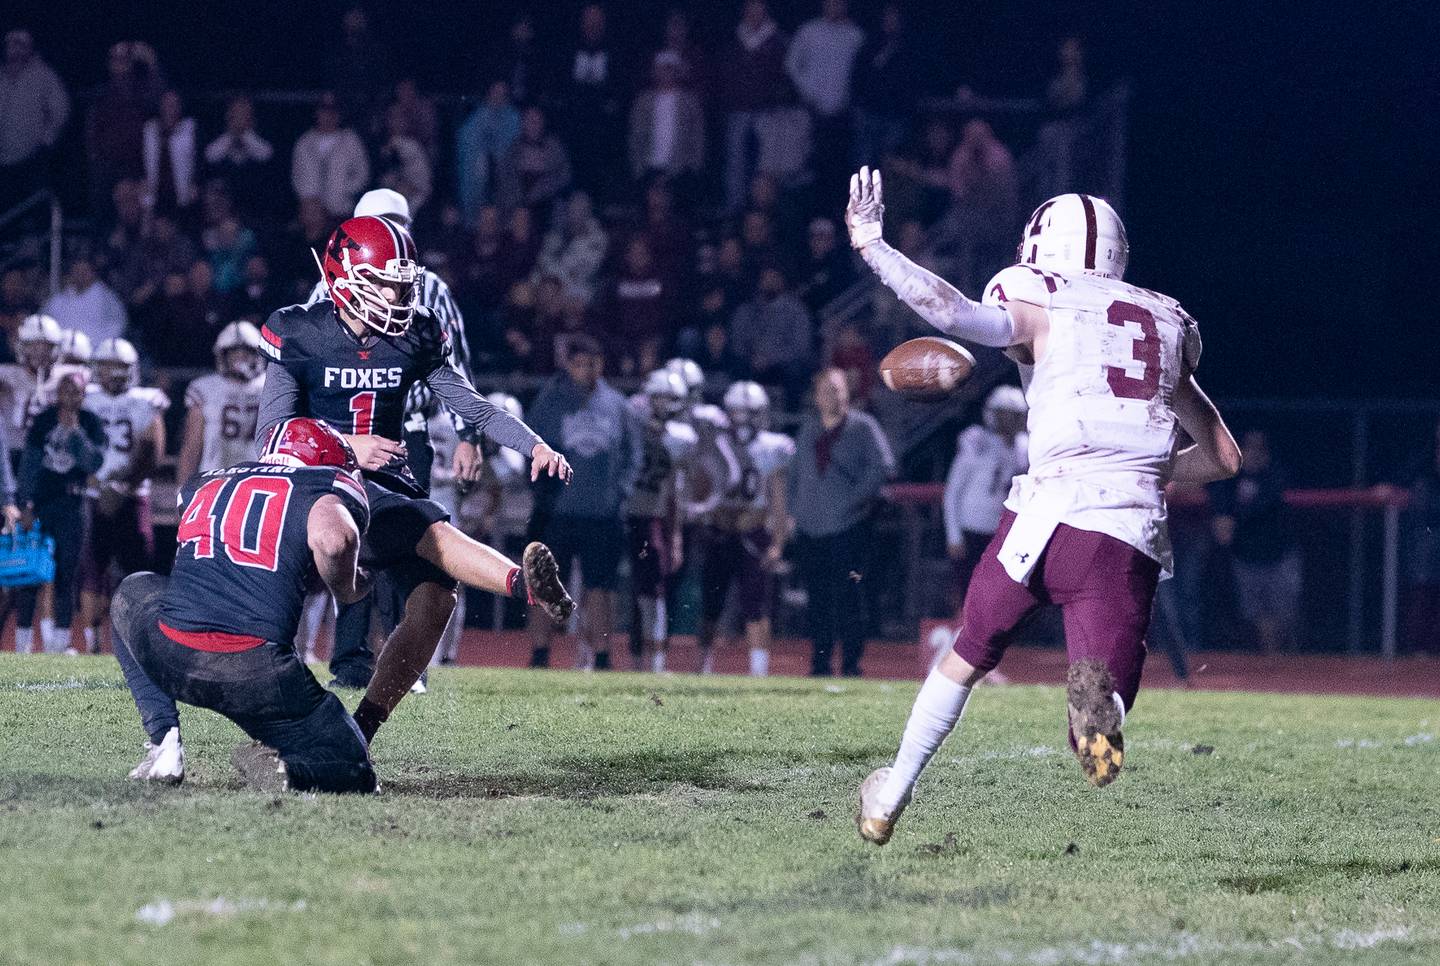 Yorkville's Hudson Fiene (1) kicks a field goal in overtime against Moline during a 7A second round playoff game at Yorkville High School on Friday, Nov 4, 2022.